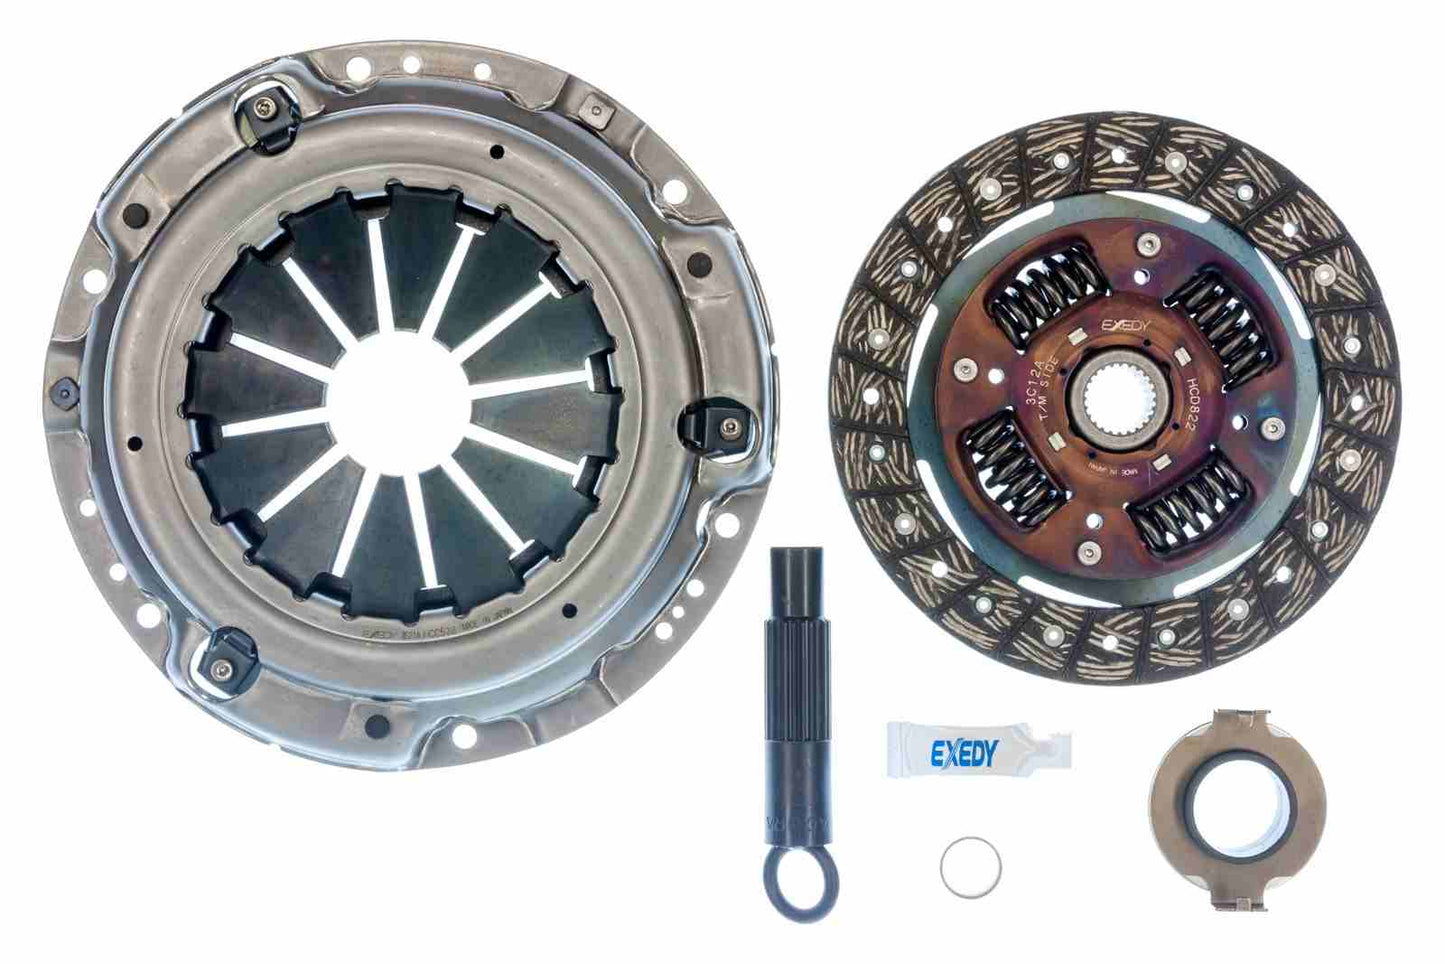 Front View of Transmission Clutch Kit EXEDY KHC09